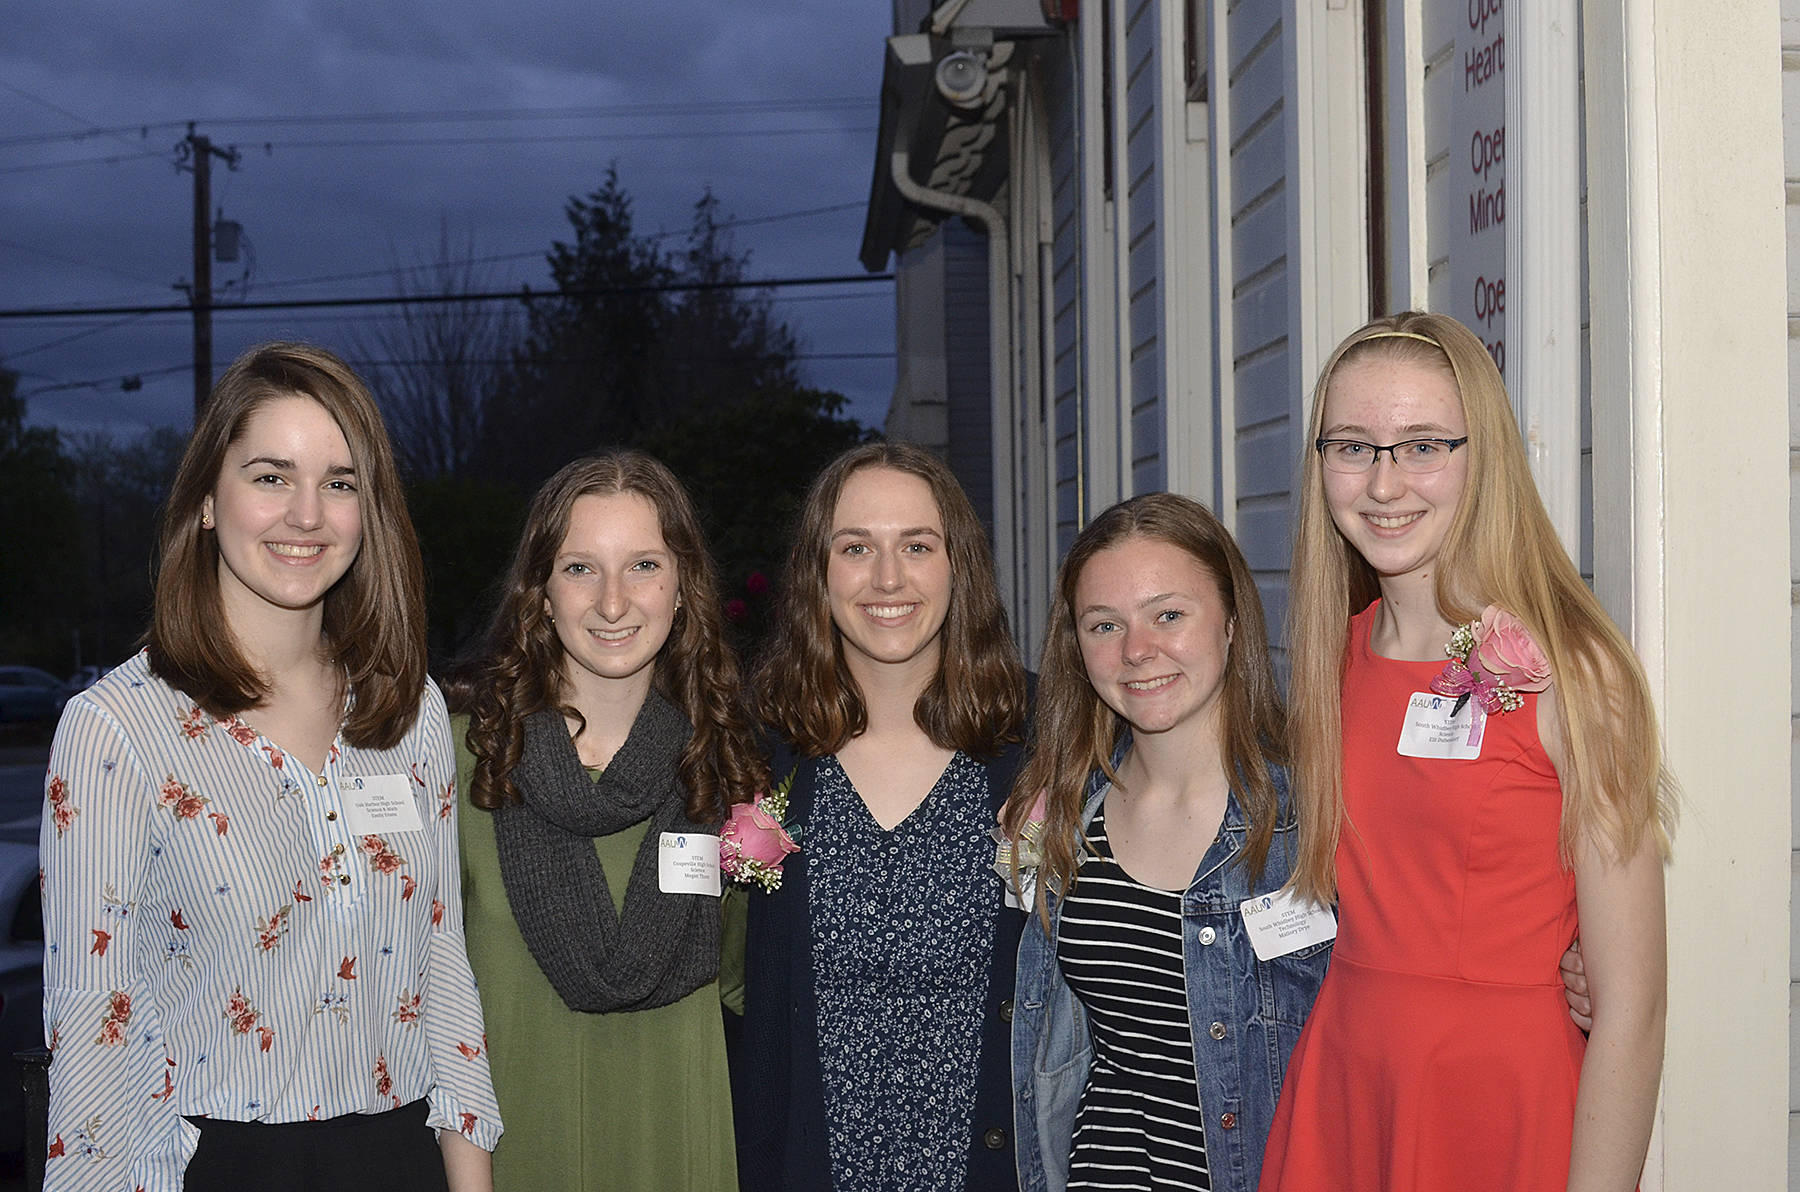 2019 AAUW STEM scholars are from left to right: Emily Evans , Science and Math, Oak Harbor High School; Megan Thorn, Science at Coupeville High School; Ashley Ricketts, Math at South Whidbey High School; Mallory Drye, Technology at SWHS; and Elli Dubendorf, Science at SWHS. Not pictured are Scout Smith (CHS) and Holly Lewis (OHHS).